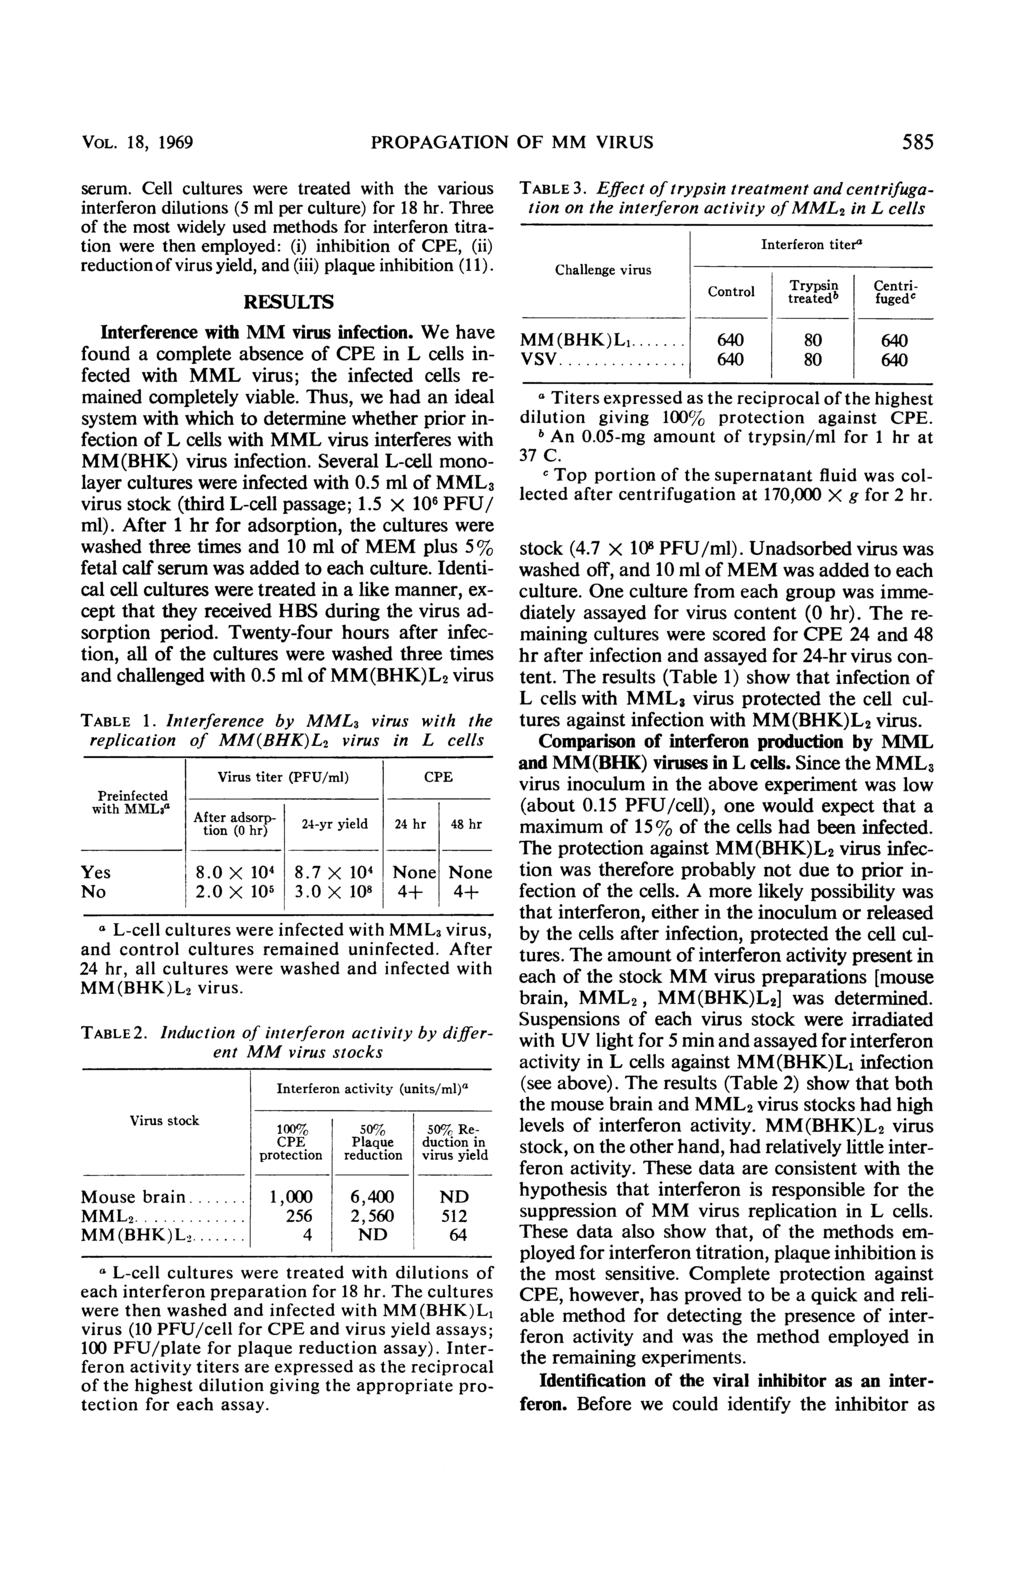 VOL. 18, 1969 PROPAGATION OF MM VIRUS 585 serum. Cell cultures were treated with the various interferon dilutions (5 ml per culture) for 18 hr.